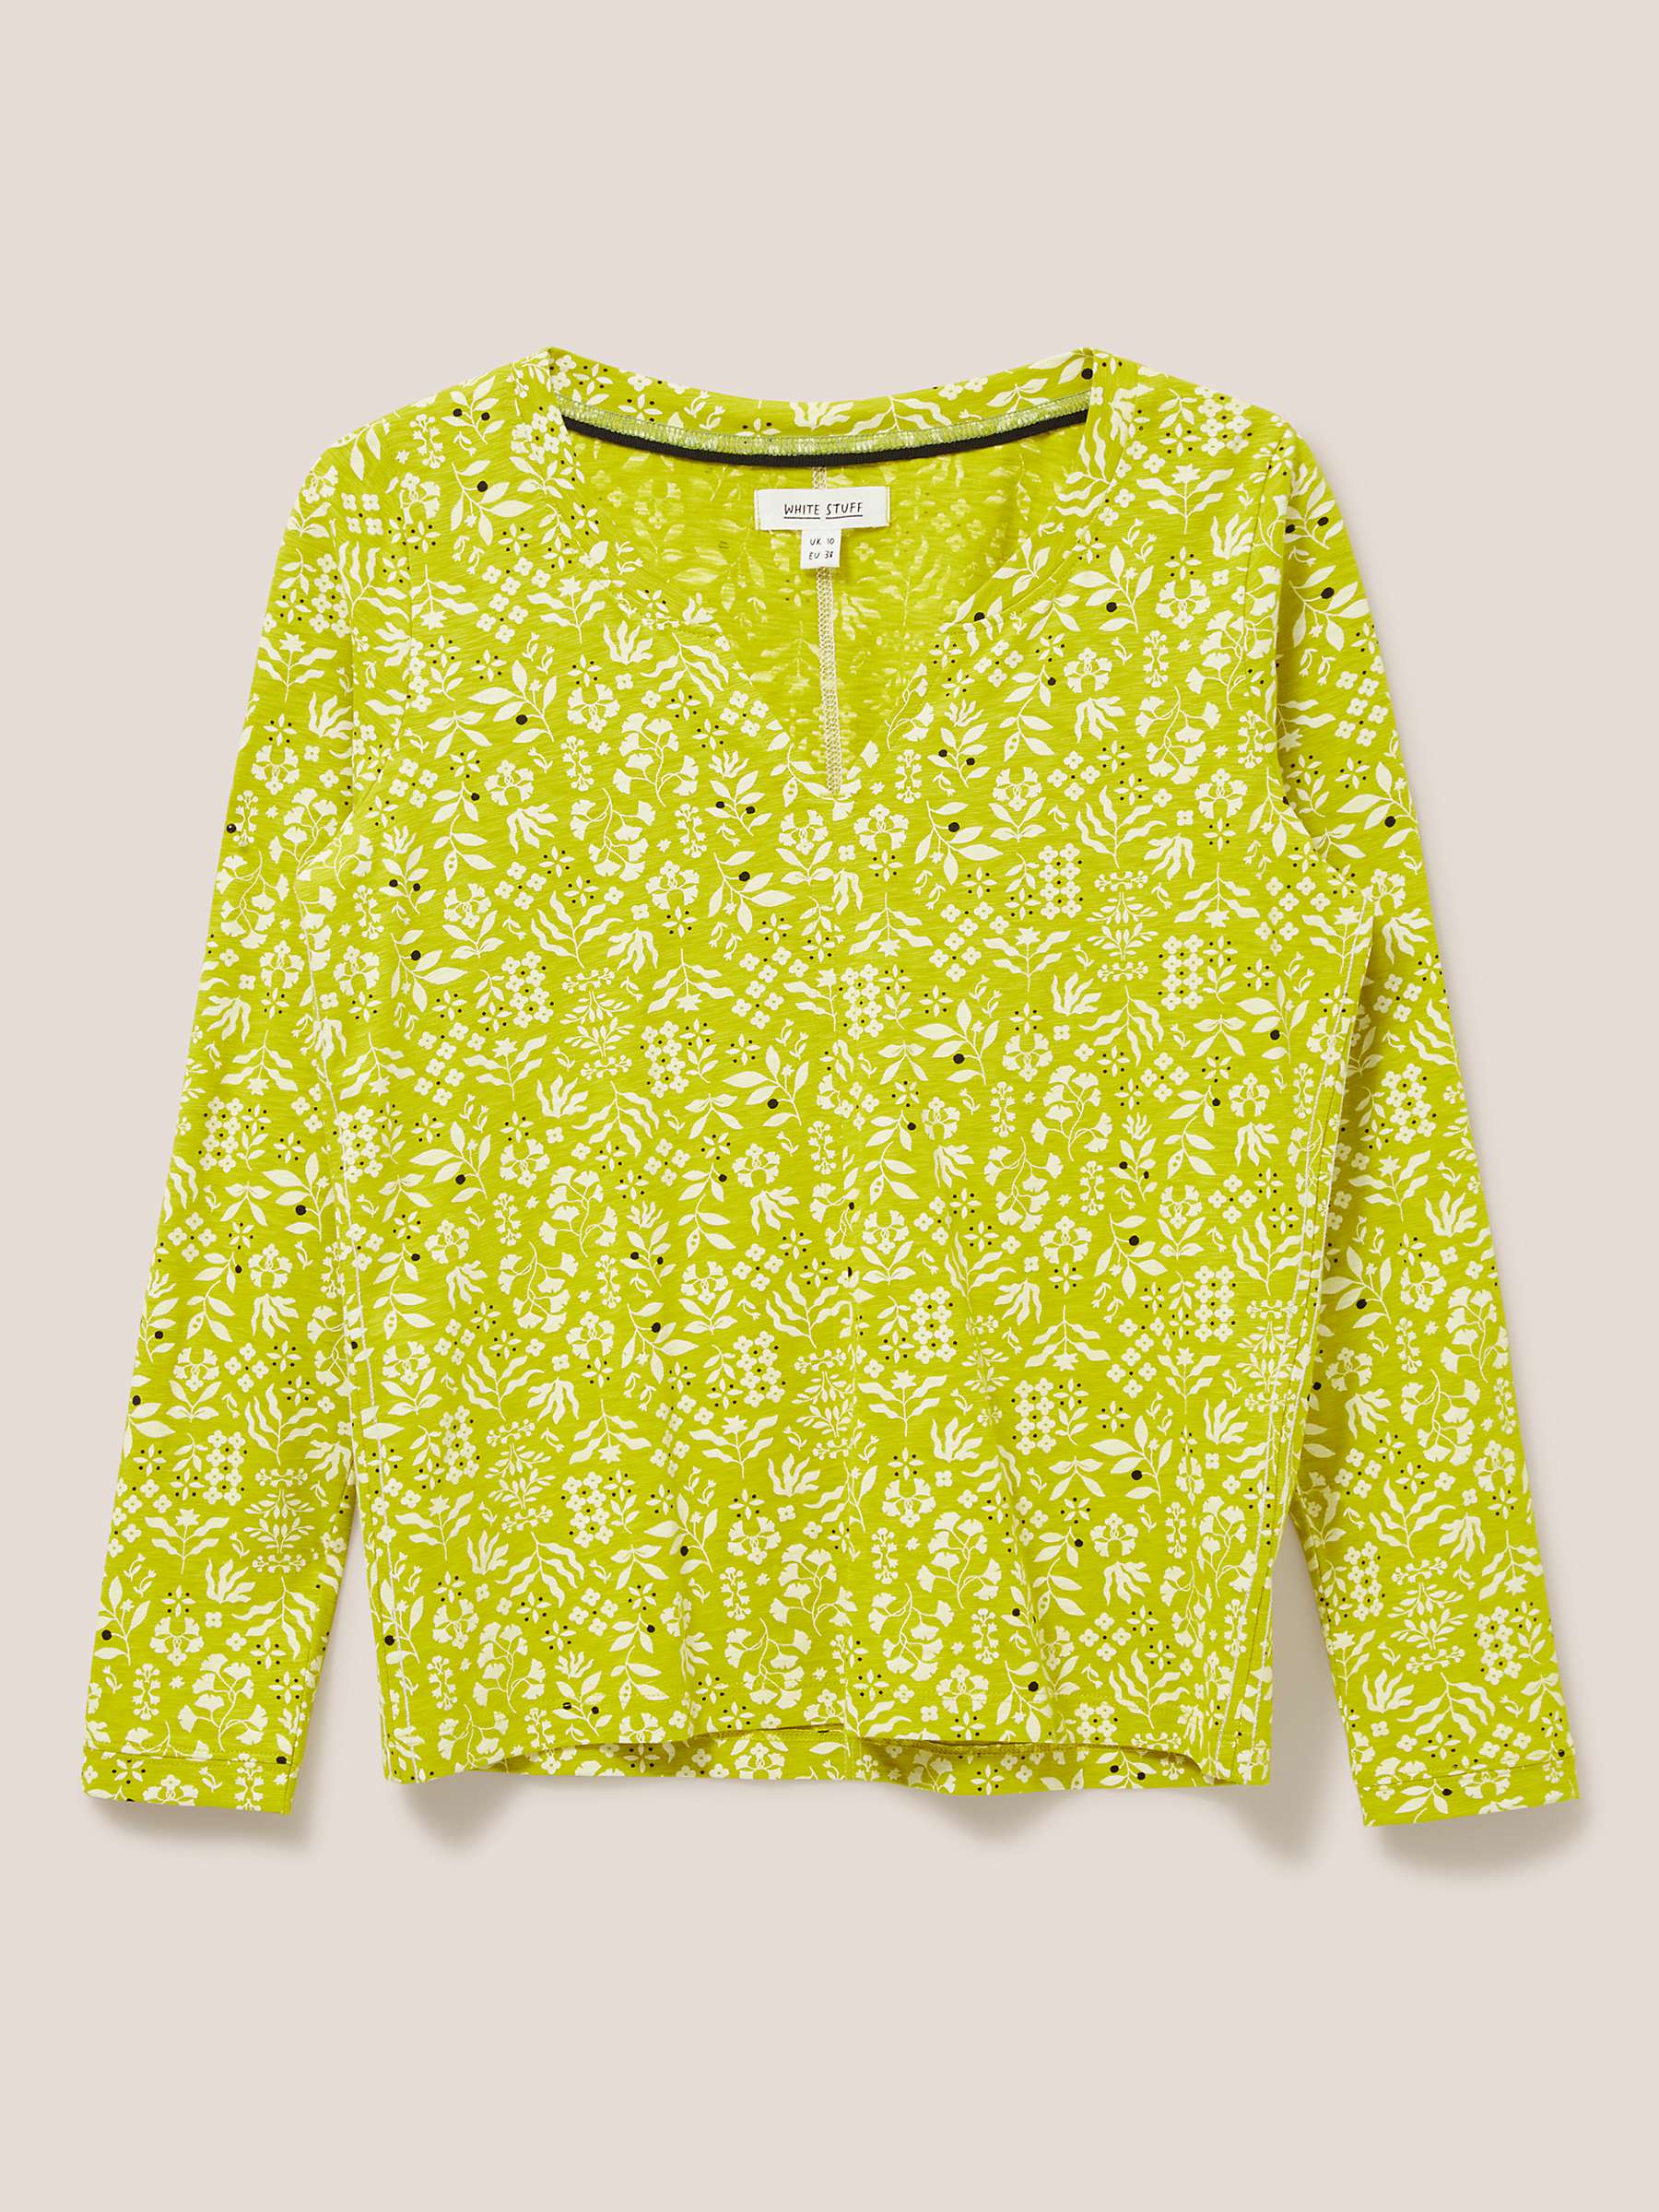 Buy White Stuff Nelly Long Sleeve Top Online at johnlewis.com